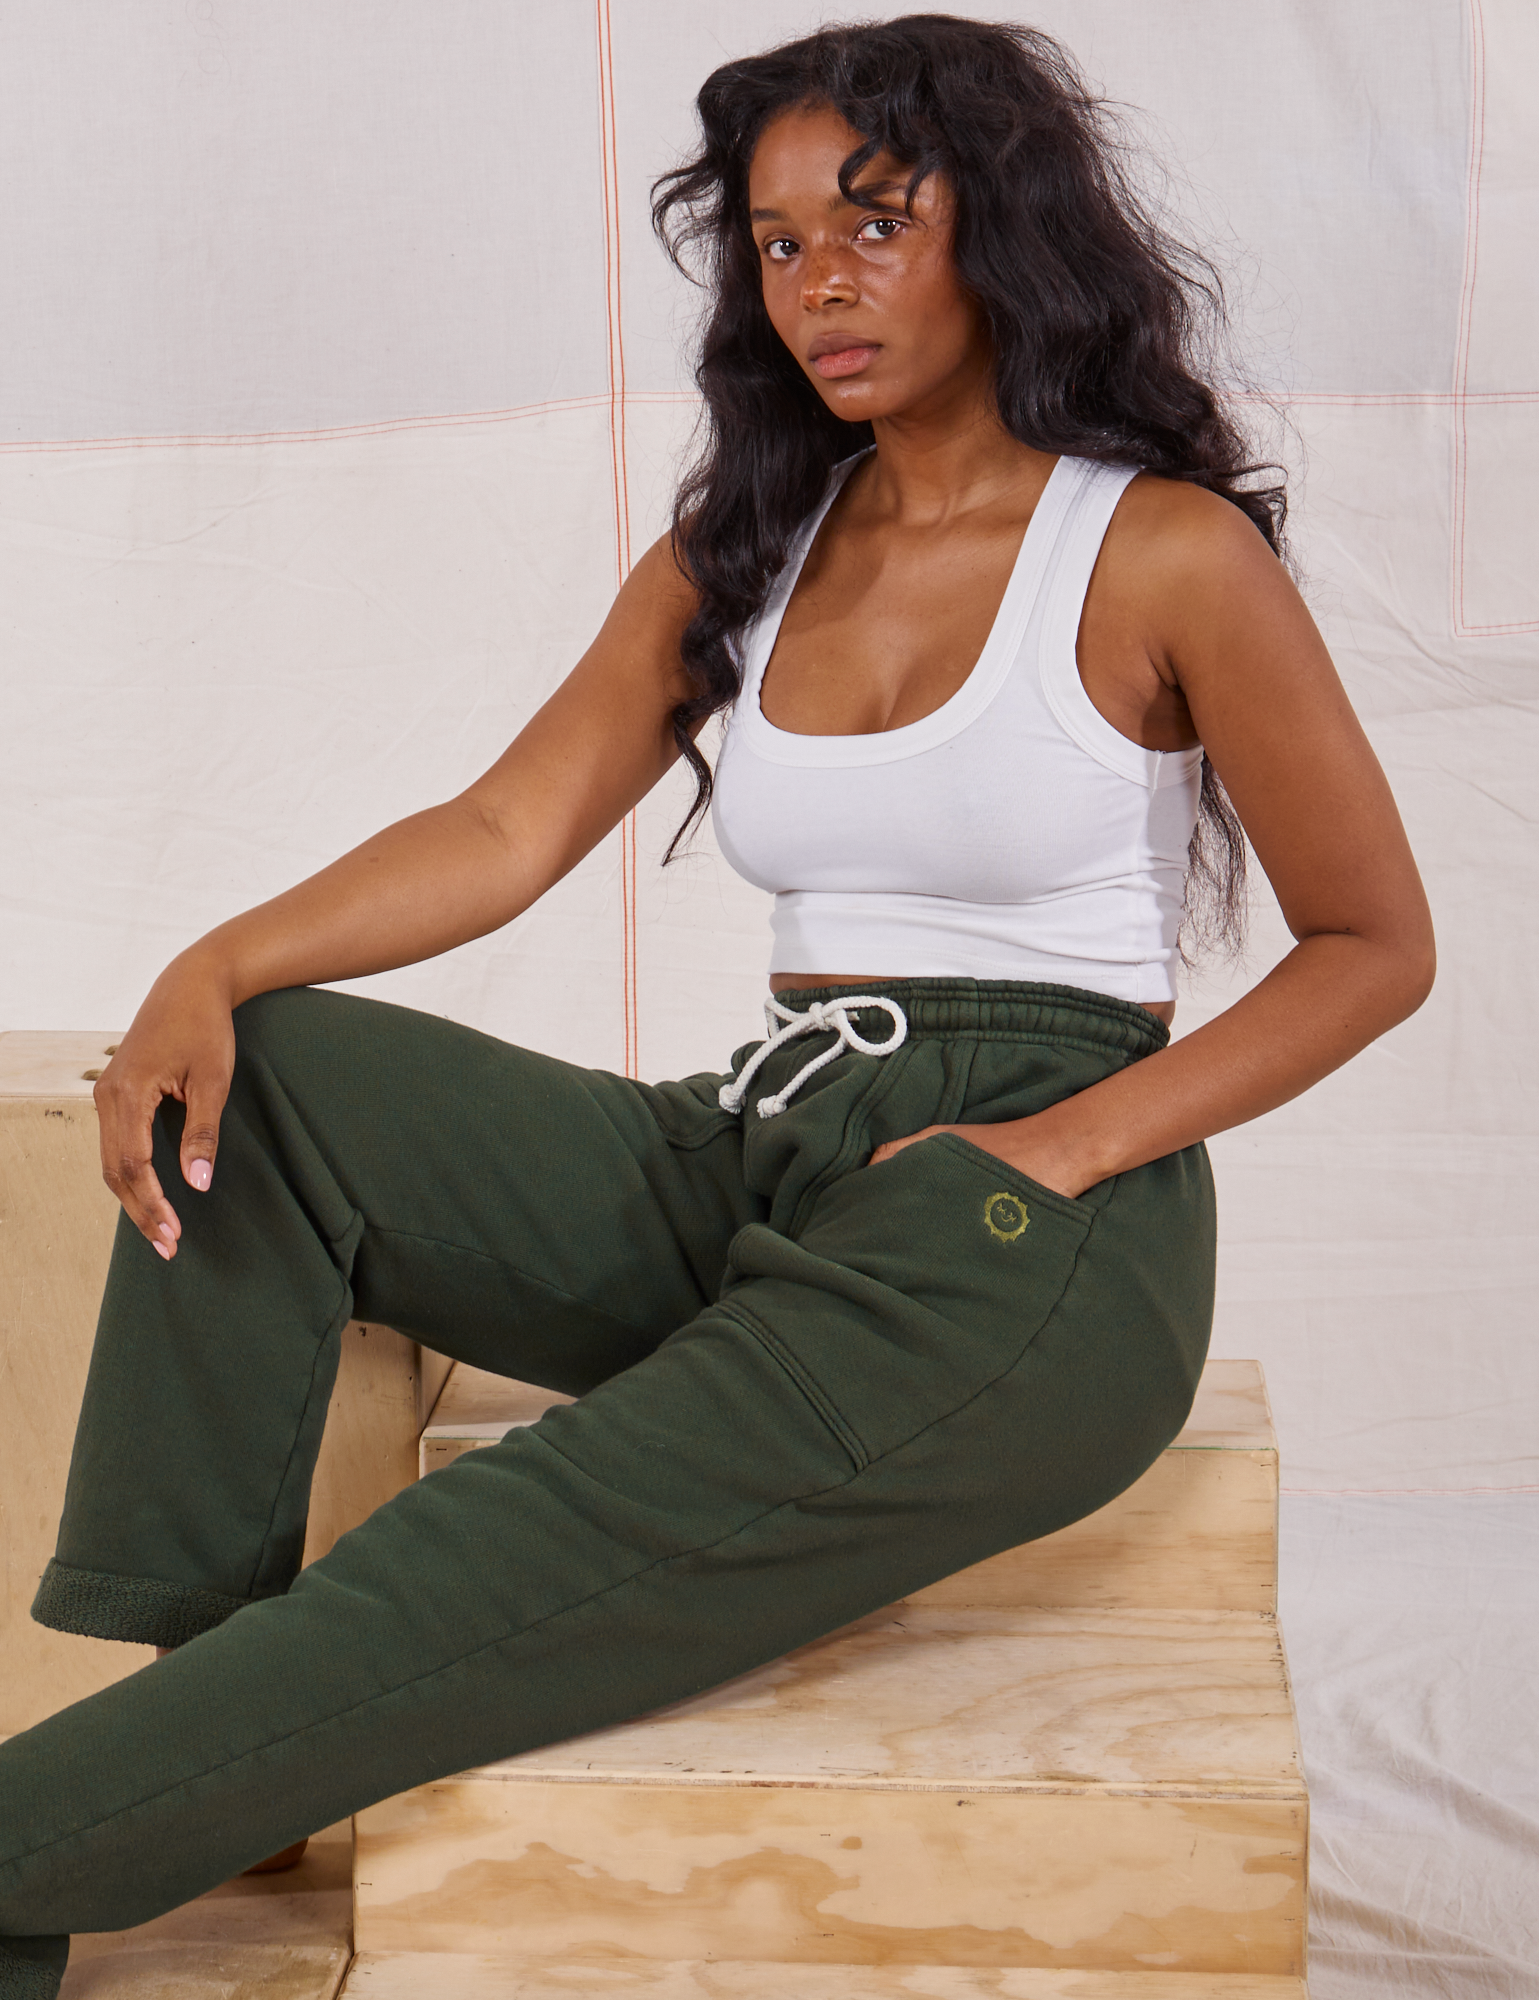 Kandia is wearing Rolled Cuff Sweat Pants in Swamp Green and vintage off-white Cropped Tank